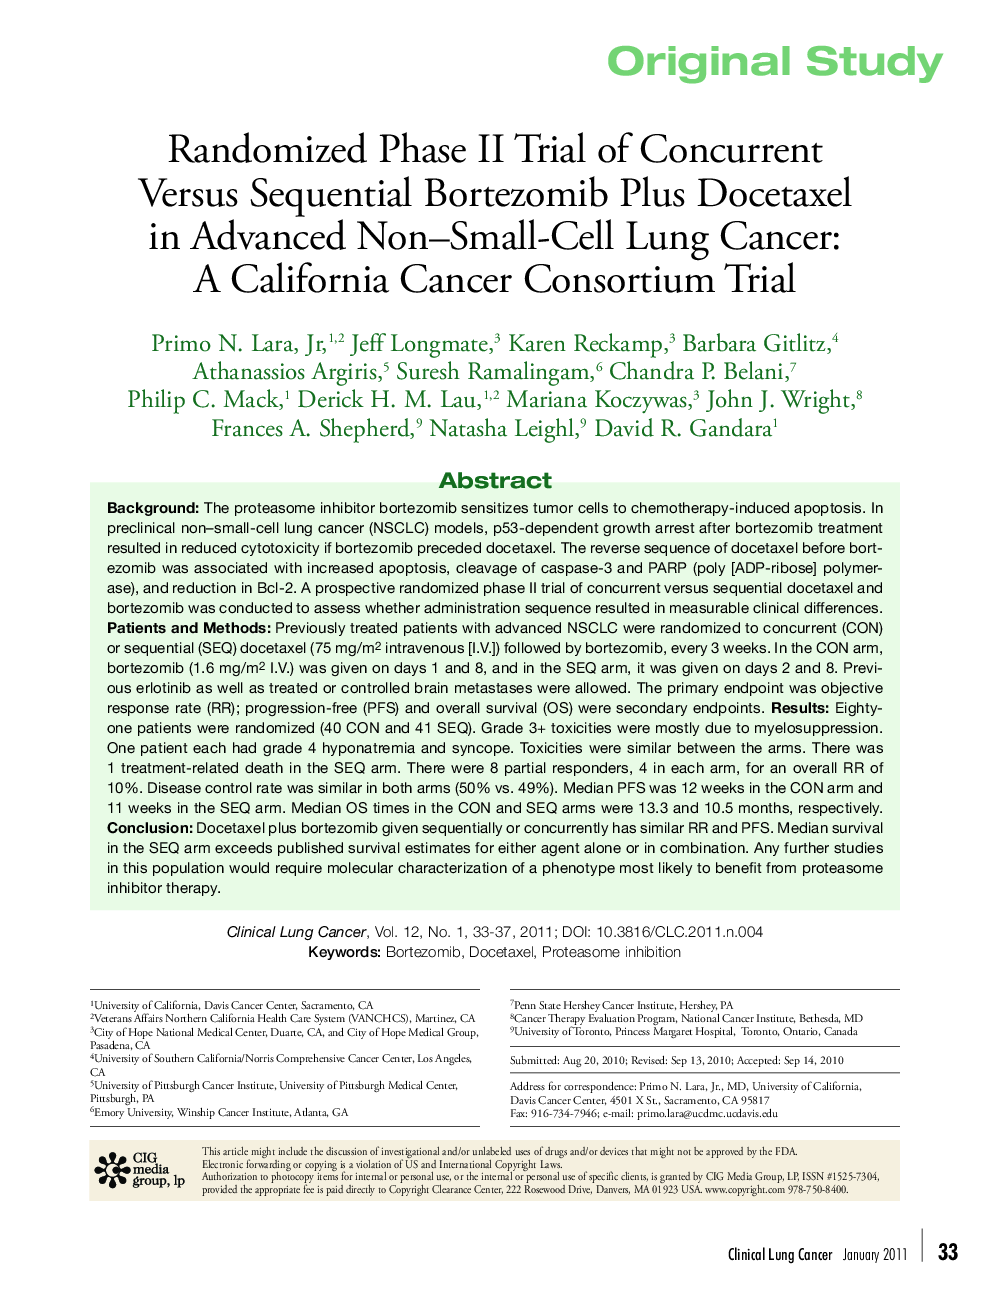 Randomized Phase II Trial of Concurrent Versus Sequential Bortezomib Plus Docetaxel in Advanced Non–Small-Cell Lung Cancer: A California Cancer Consortium Trial 